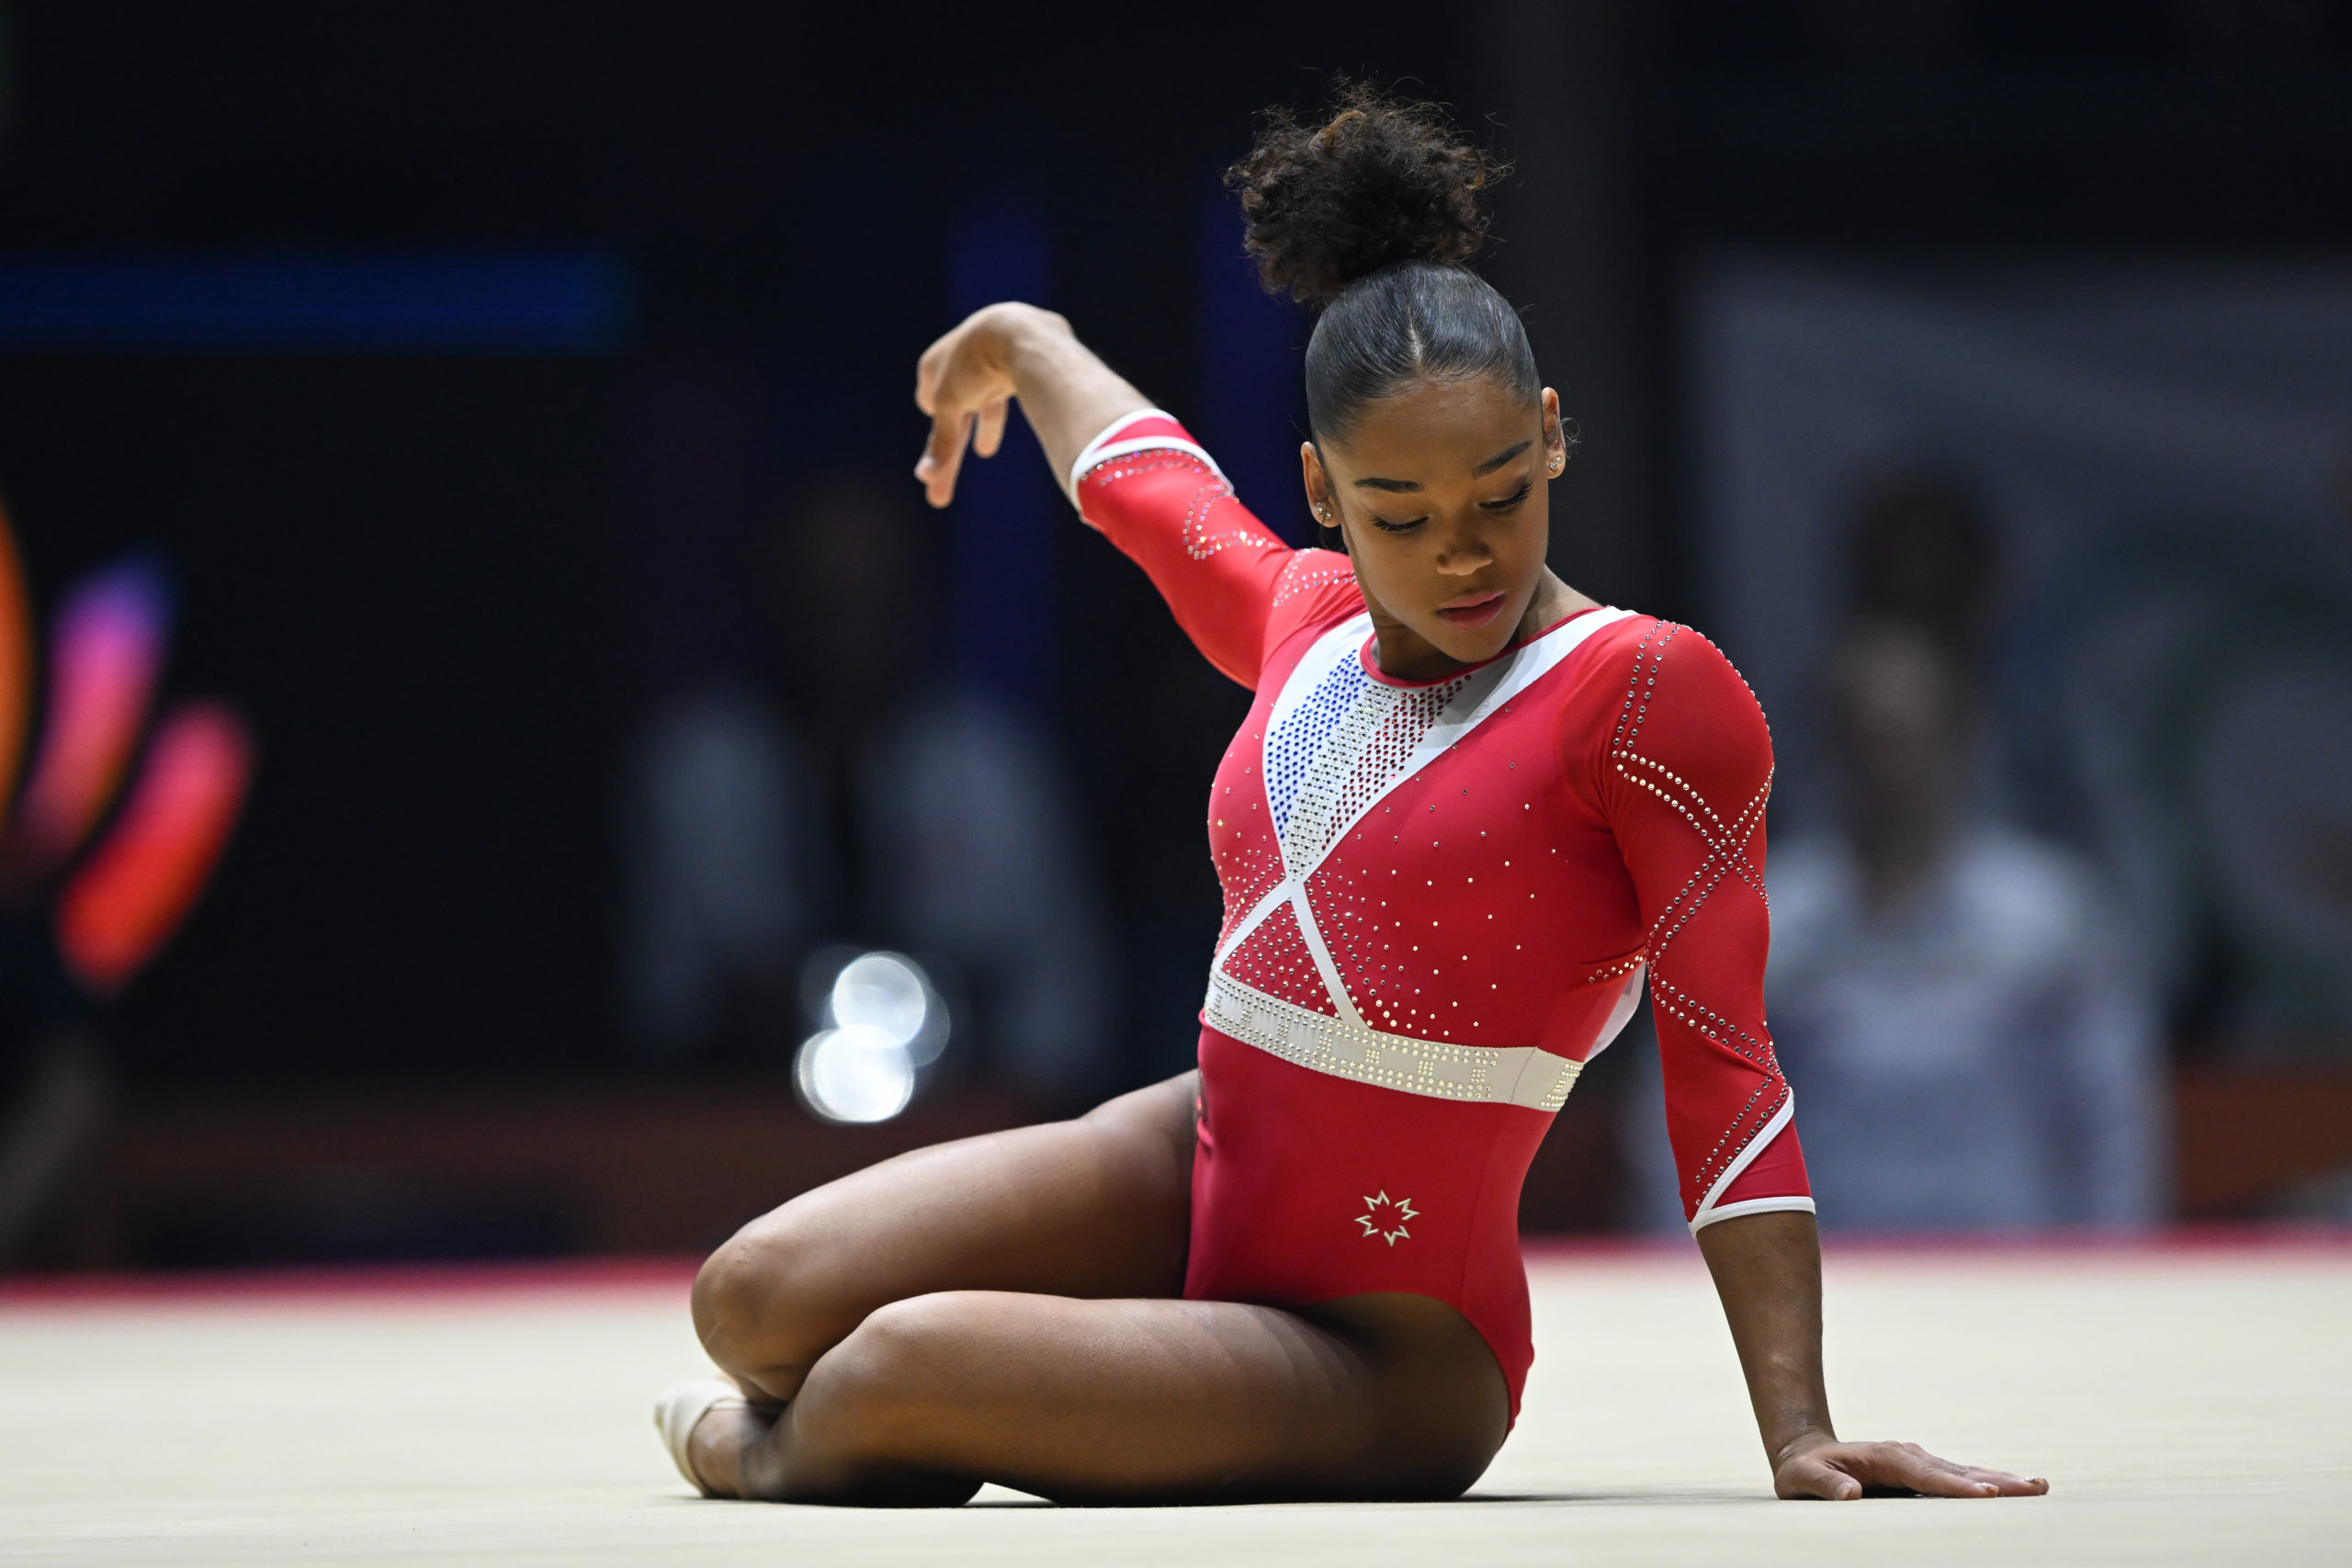 Melanie de Jesus dos Santos competes on floor during the women’s team final at the 2023 Artistic Gymnastics World Championships.